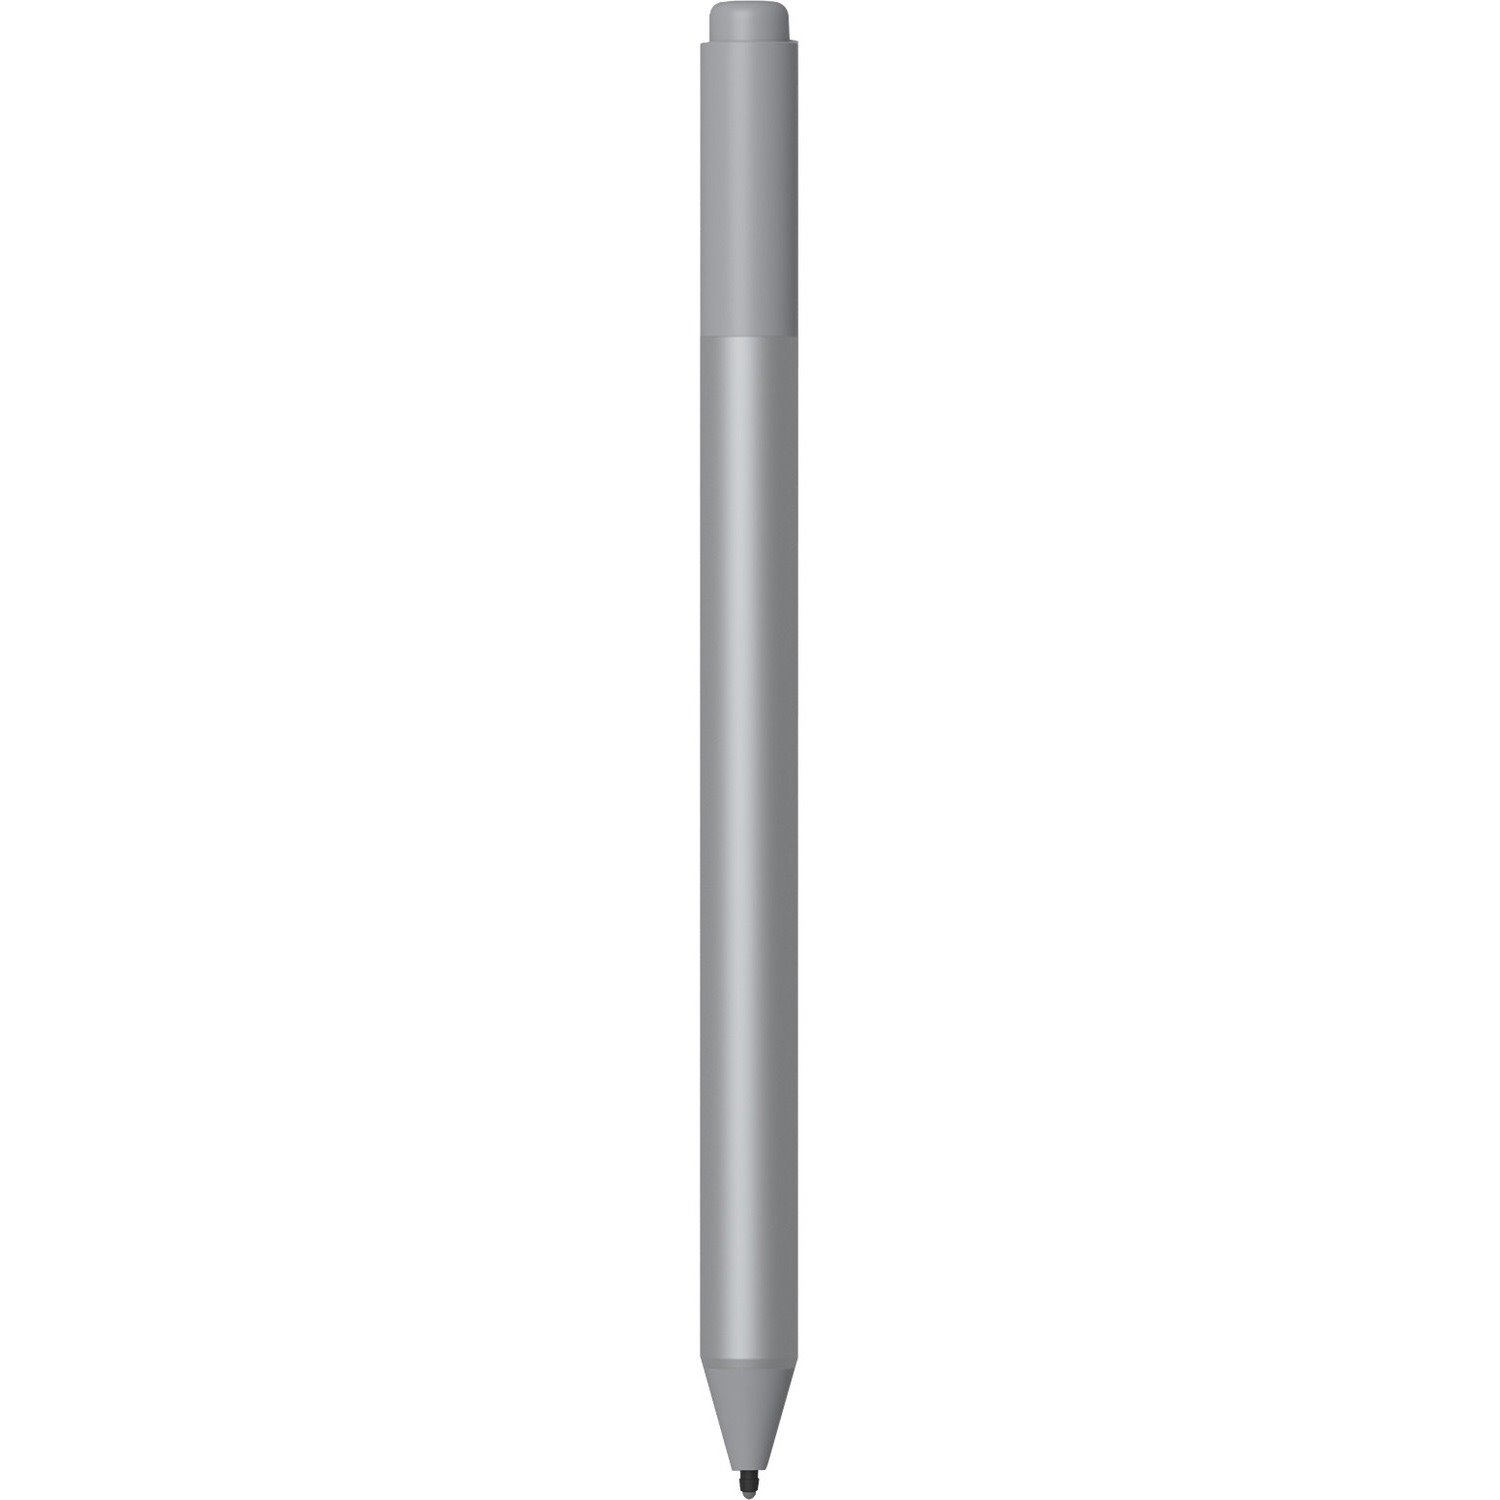 Microsoft Surface Pen Bluetooth Stylus - Silver SURFACE PEN V4 - SILVER (Compatible with GO 3, needs AAAA Batteries)